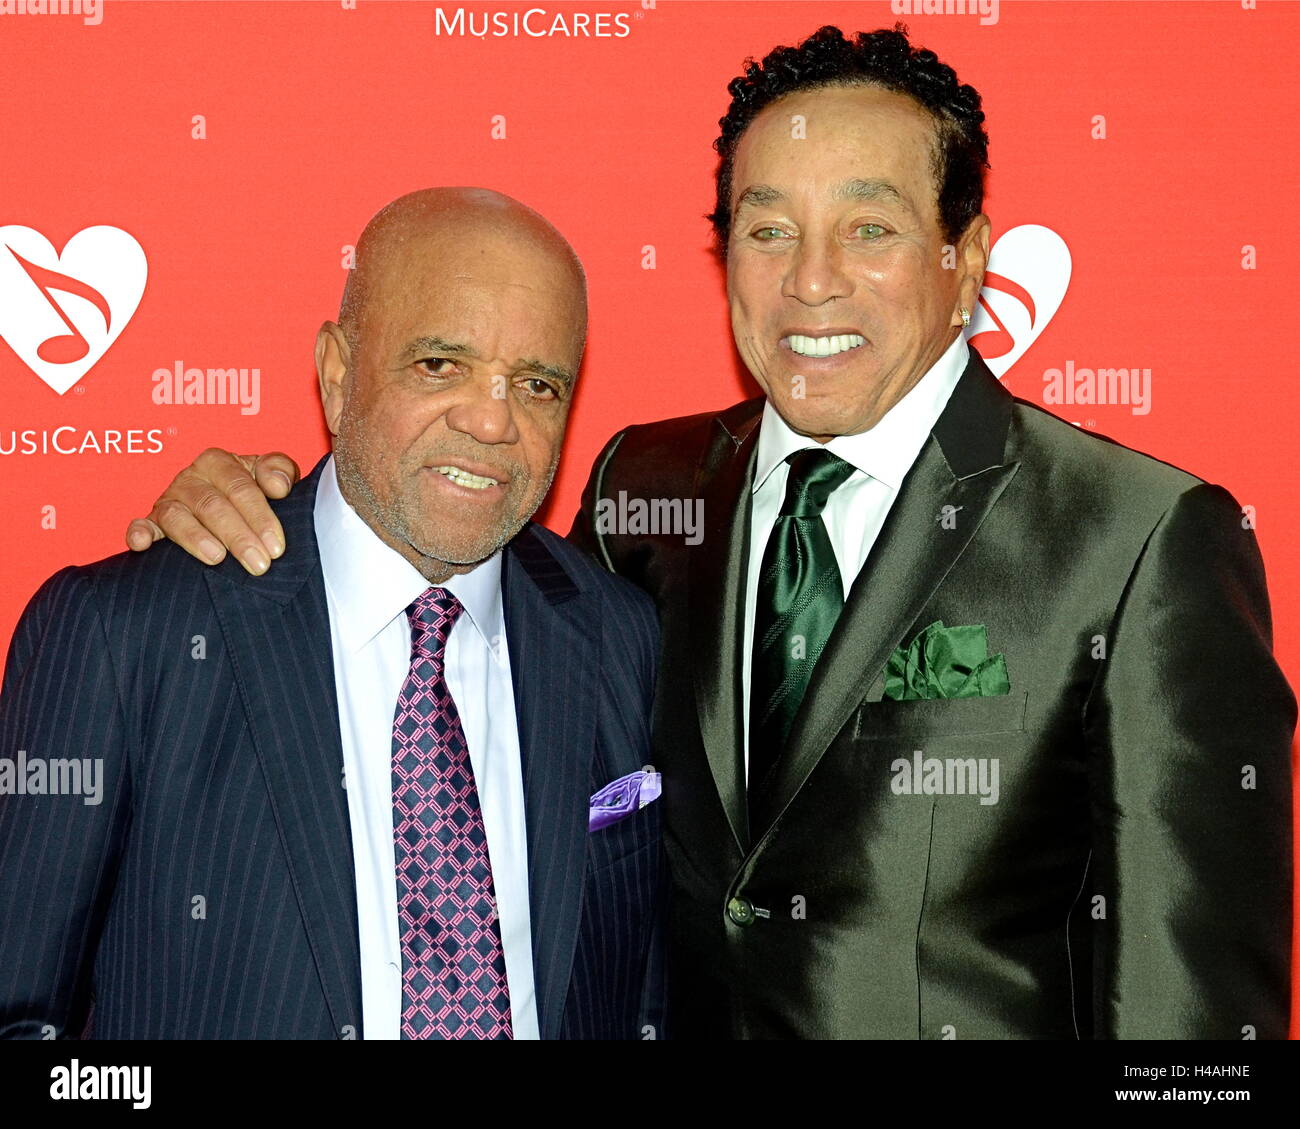 Barry GOrdy and Smokey Robinson arrives for the 12th Annual MusiCares MAP Fund Tribute Concert at The Novo by Microsoft on May 19, 2016 in Los Angeles, California. Stock Photo